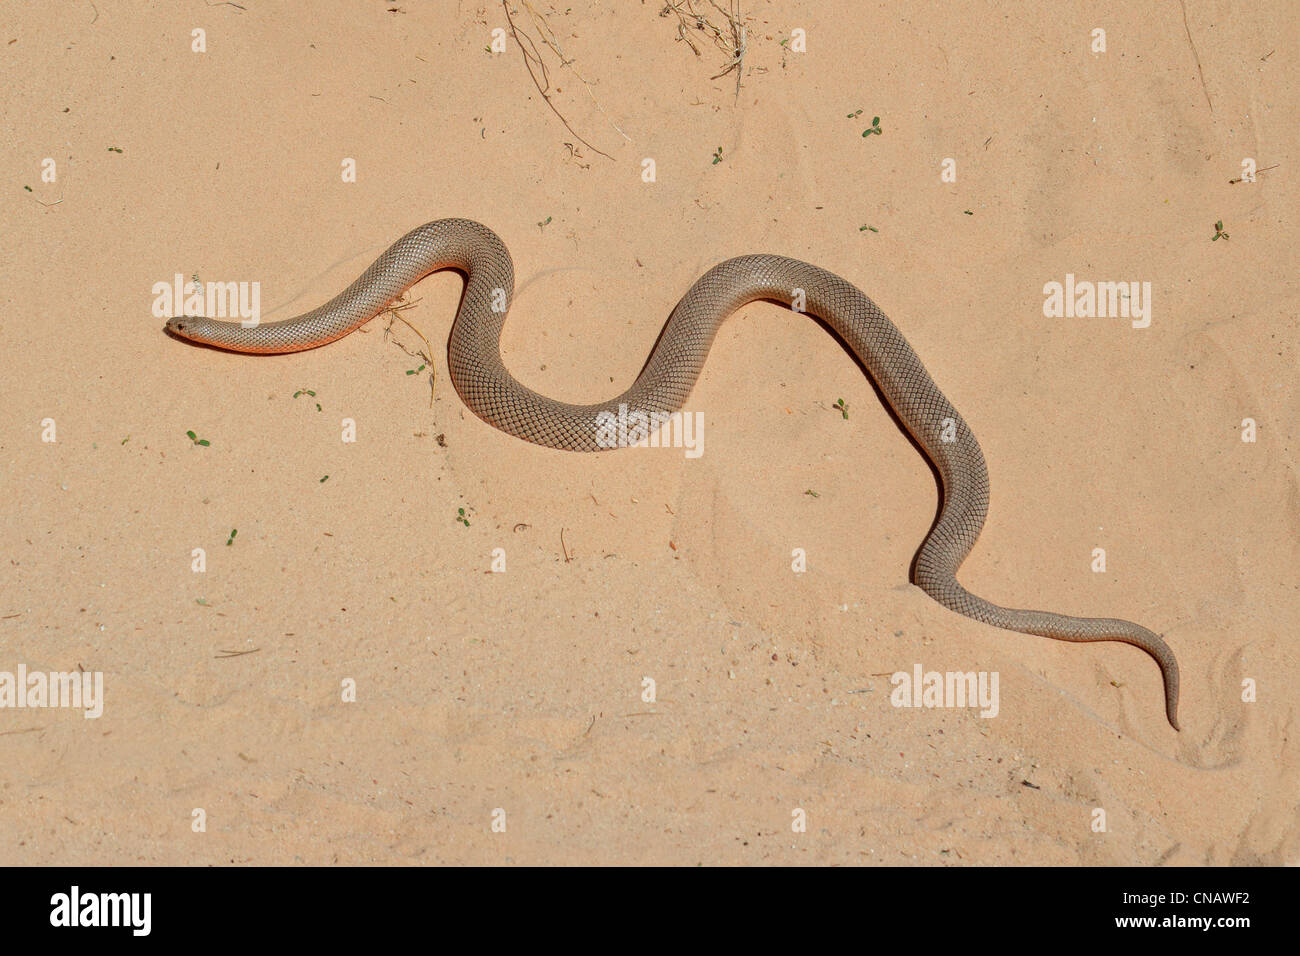 A mole snake on sand (Pseudaspis cana), southern Africa Stock Photo